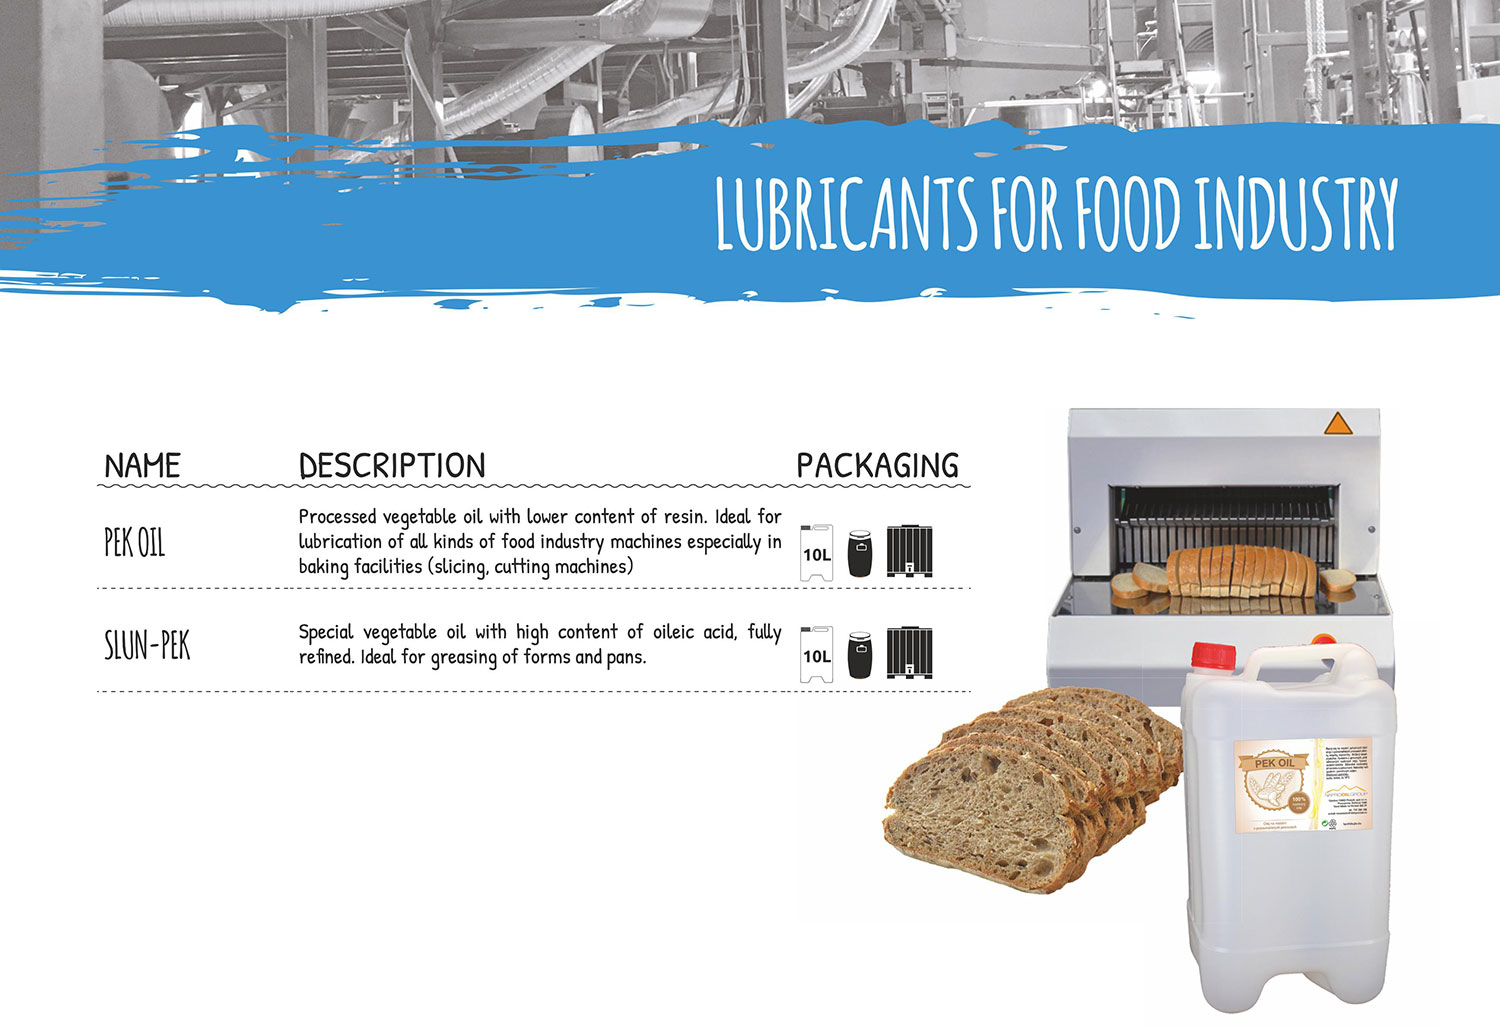 lubricants for food industry